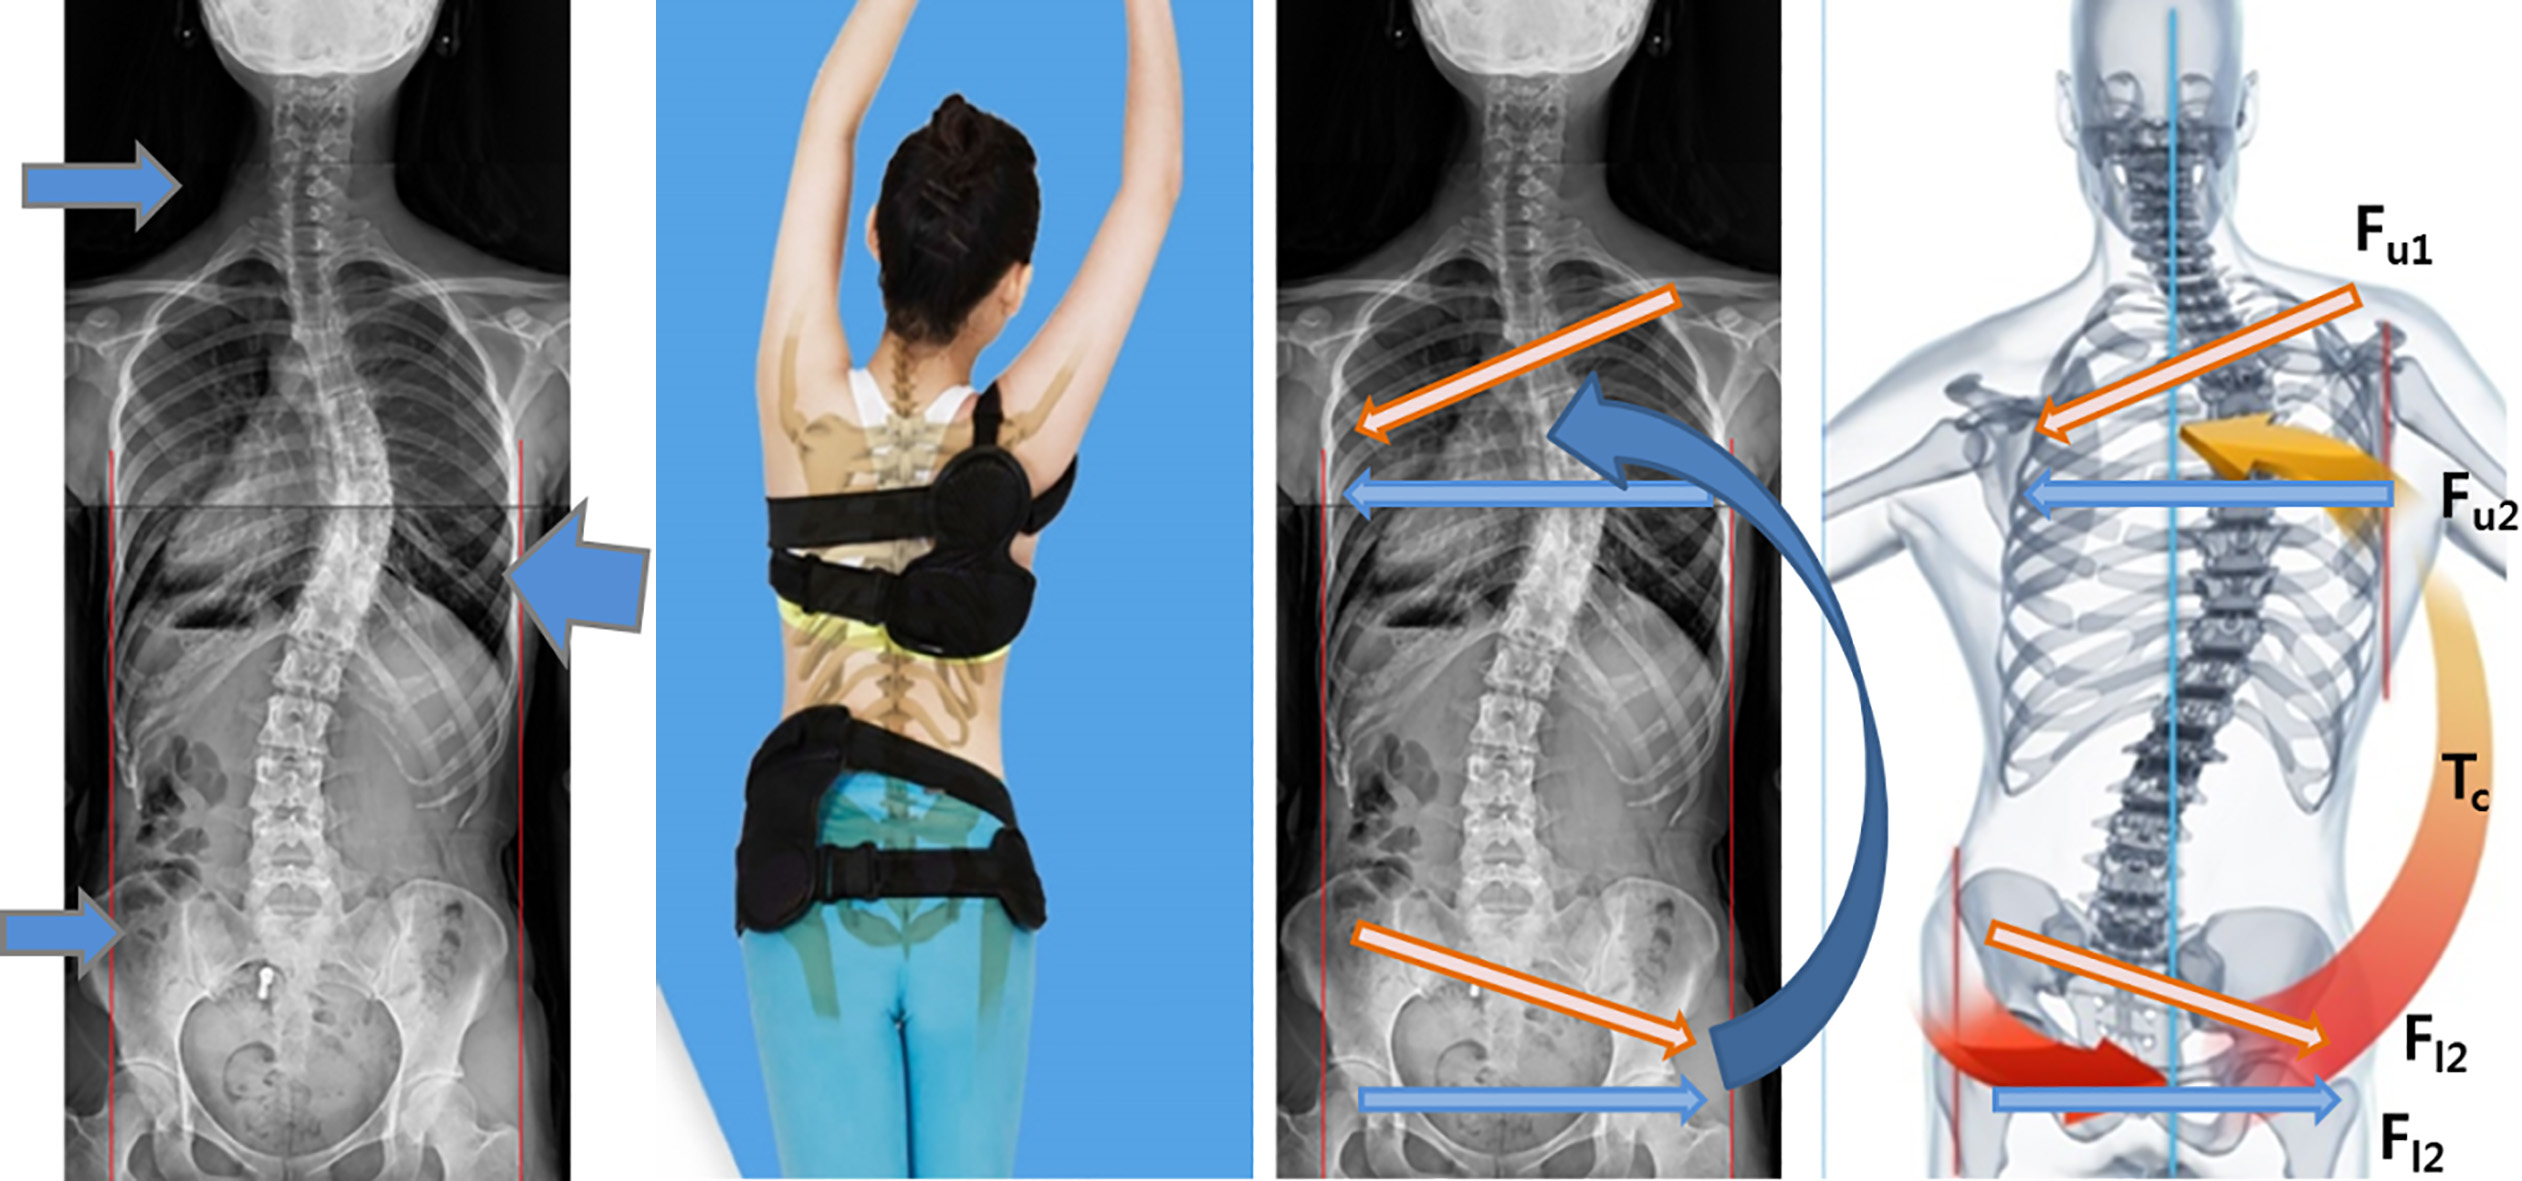 (L) Three point pressure method; (R) Counter compensation method: Two forces Fu1 and Fu2 in the upper area are applied to transverse direction of the ribs. Fl1 and Fl2 in the pelvis are reaction forces required to obtain equilibrium in the body. Tc is the counter compensation torque acting via the rib cage onto the spine.